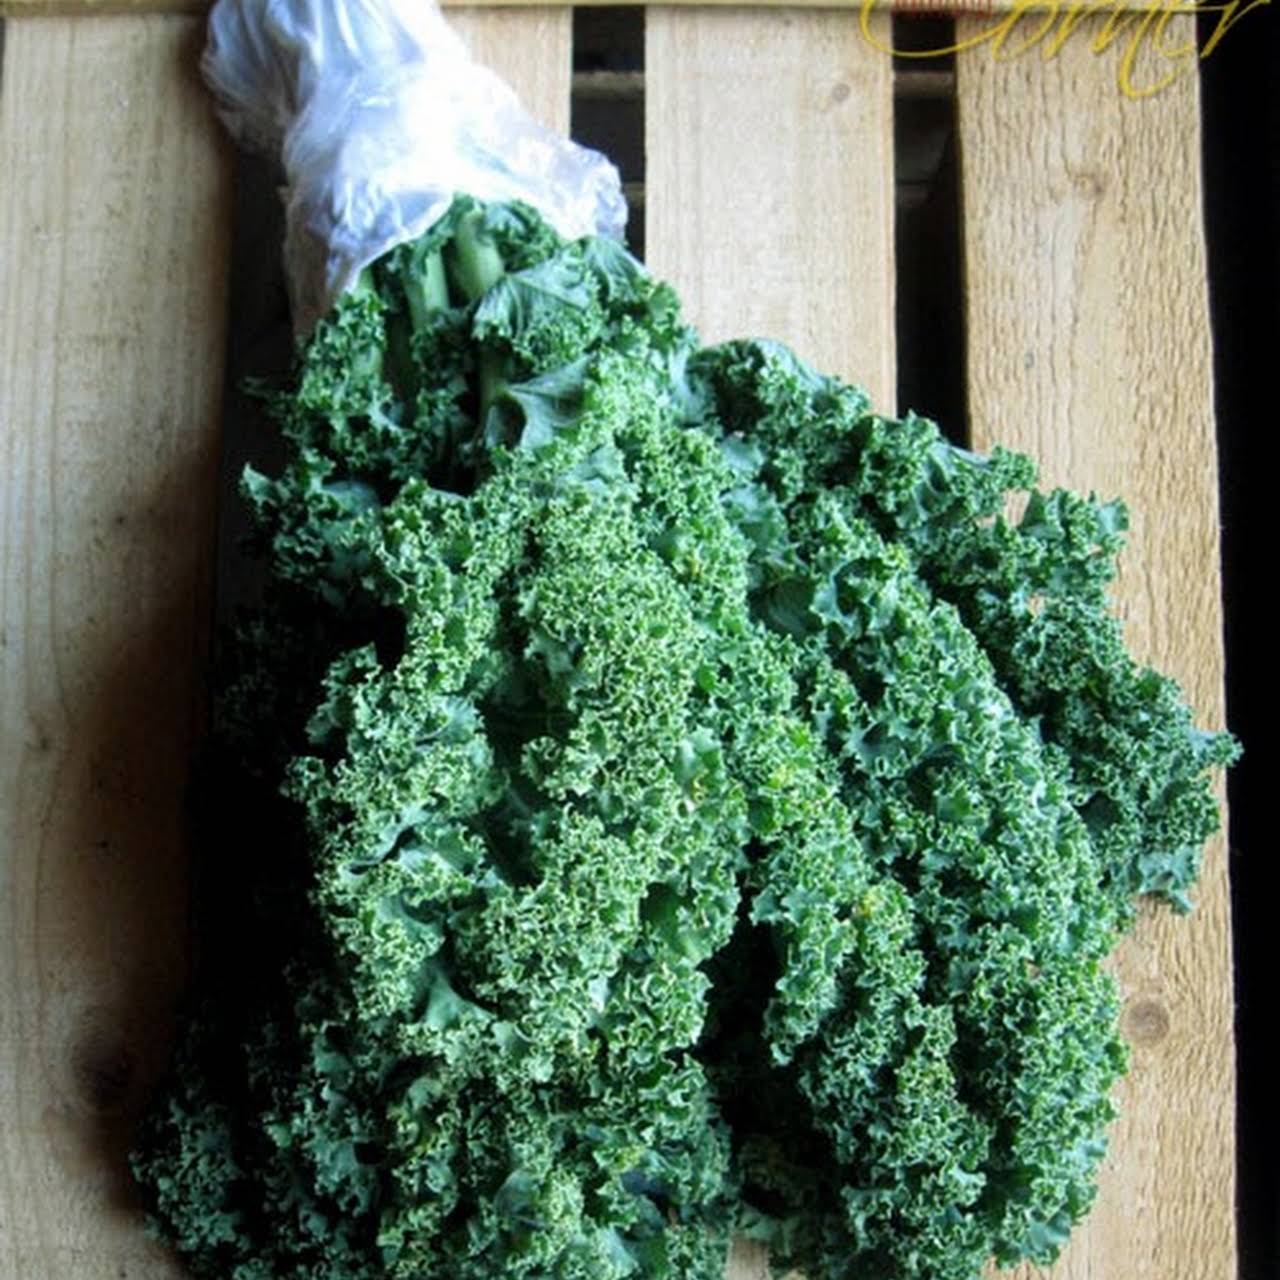 10 Best Curly Kale Recipes